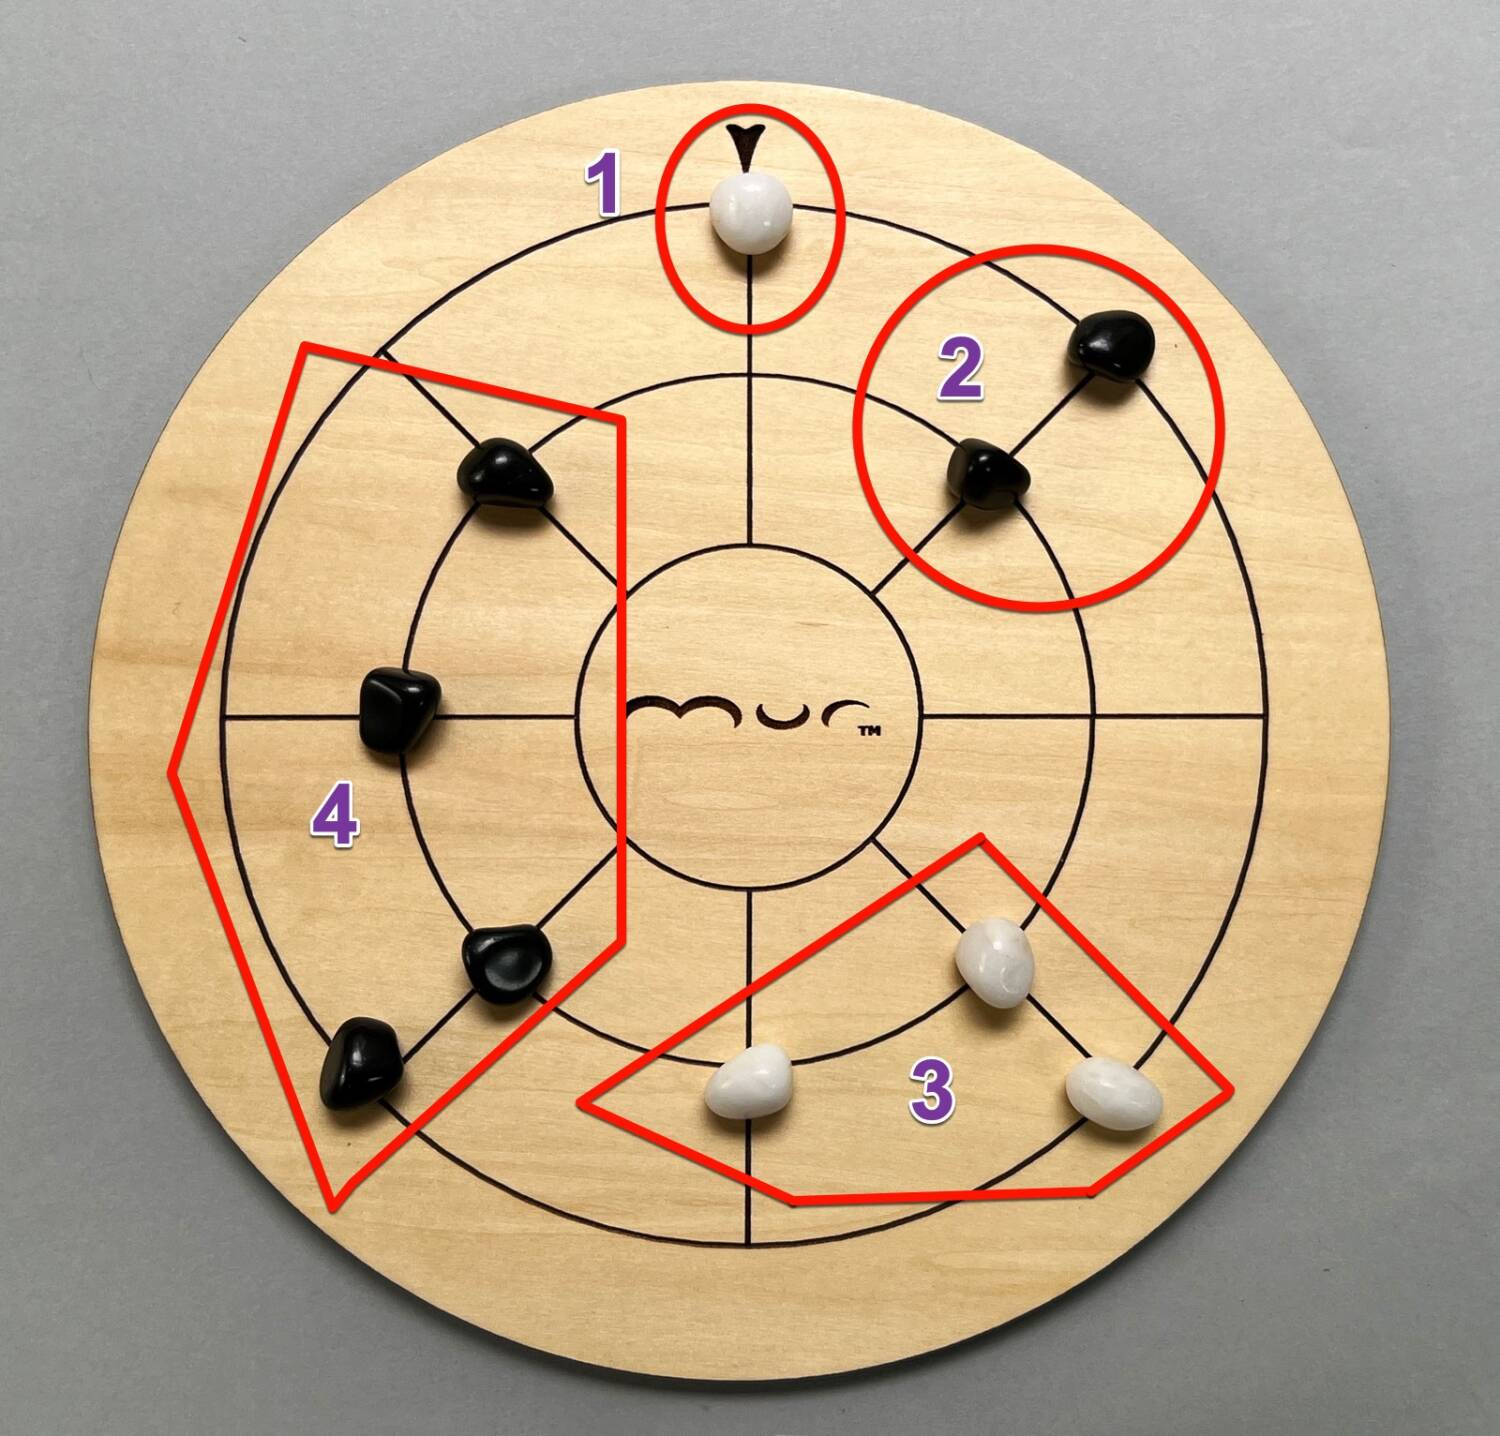 Examples of 1, 2, 3, and 4 connected stones on the board.